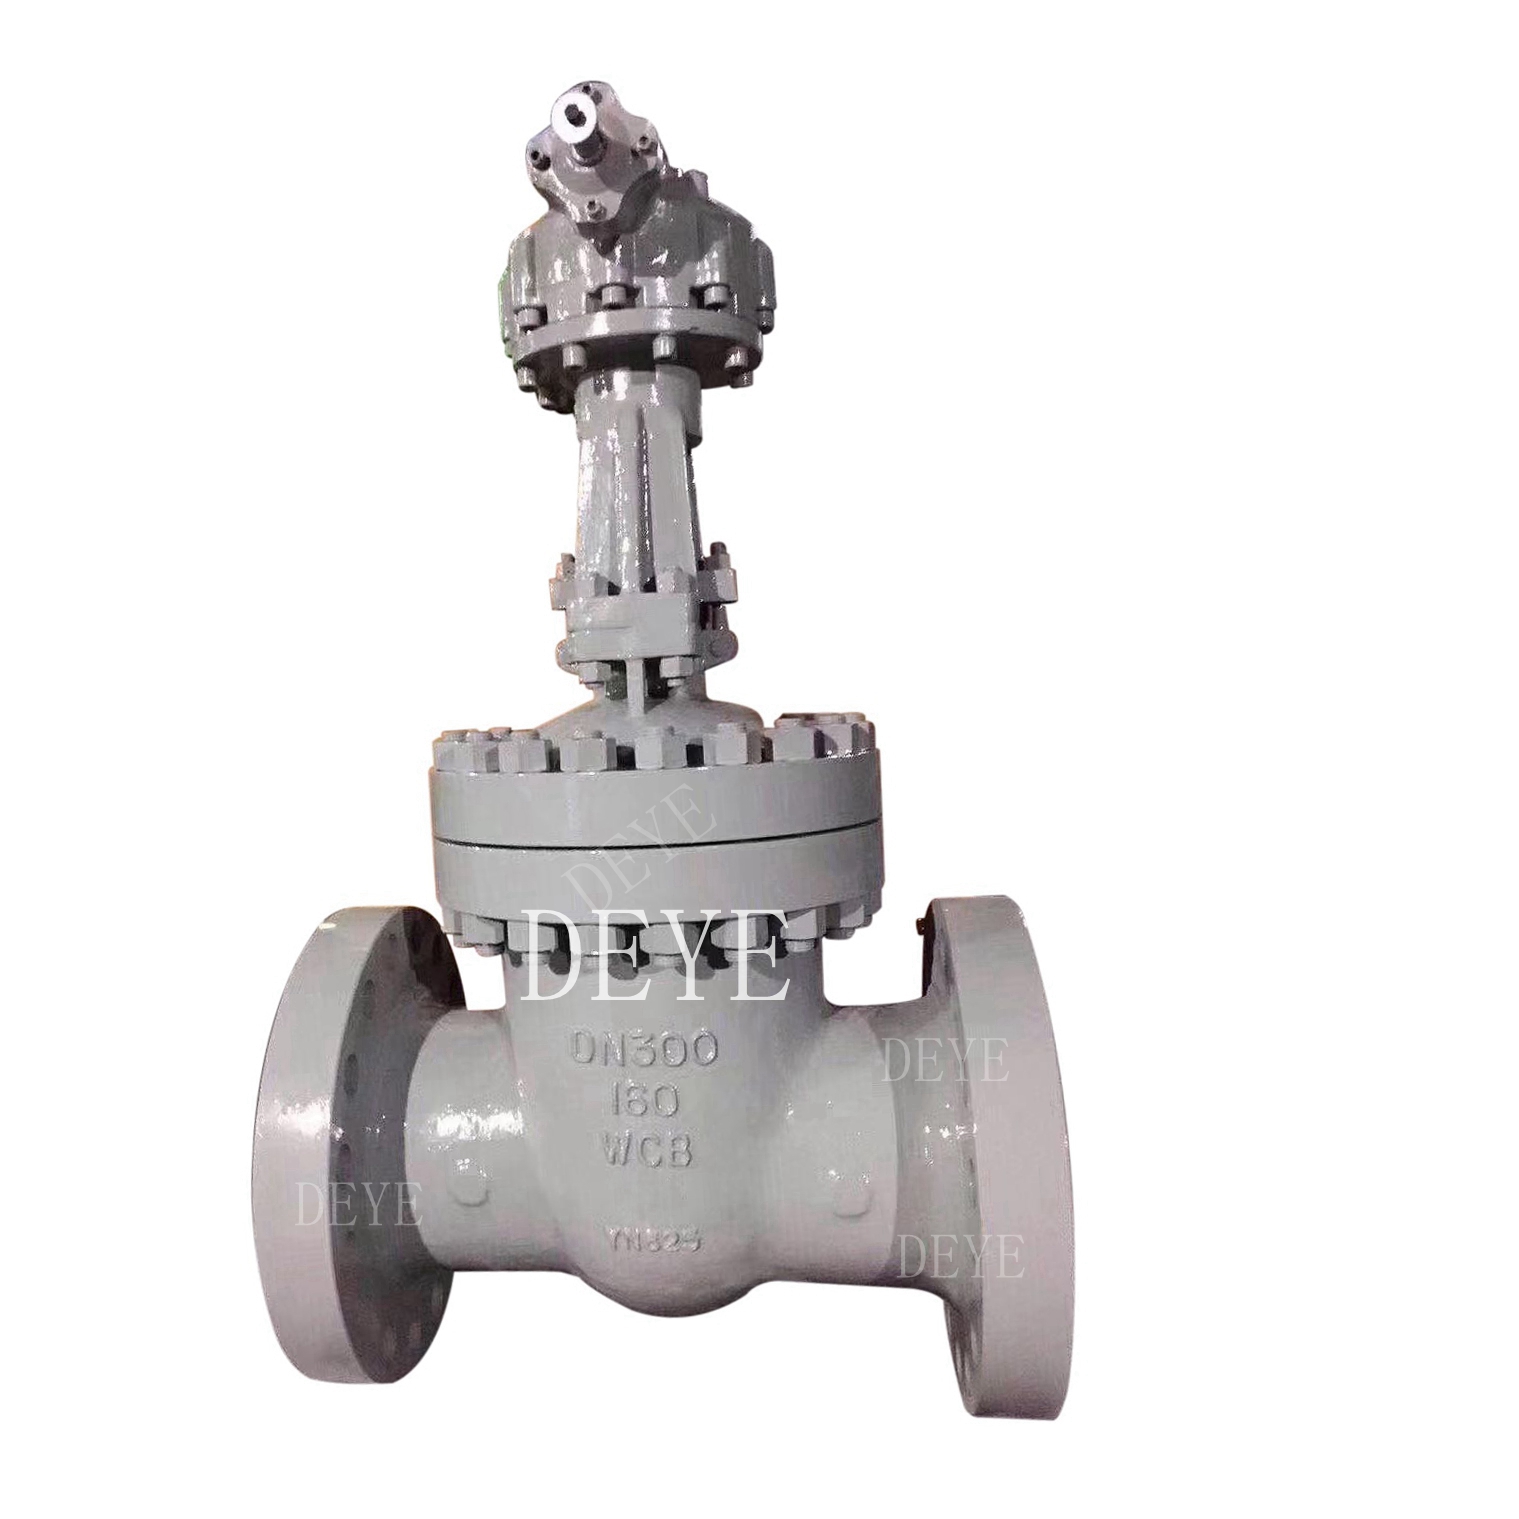 China Gold Supplier for Ss316 Low Temperature -
 heavy WCB Cast steel PN160 bar Gate Valve GVC-00160-12 – Deye